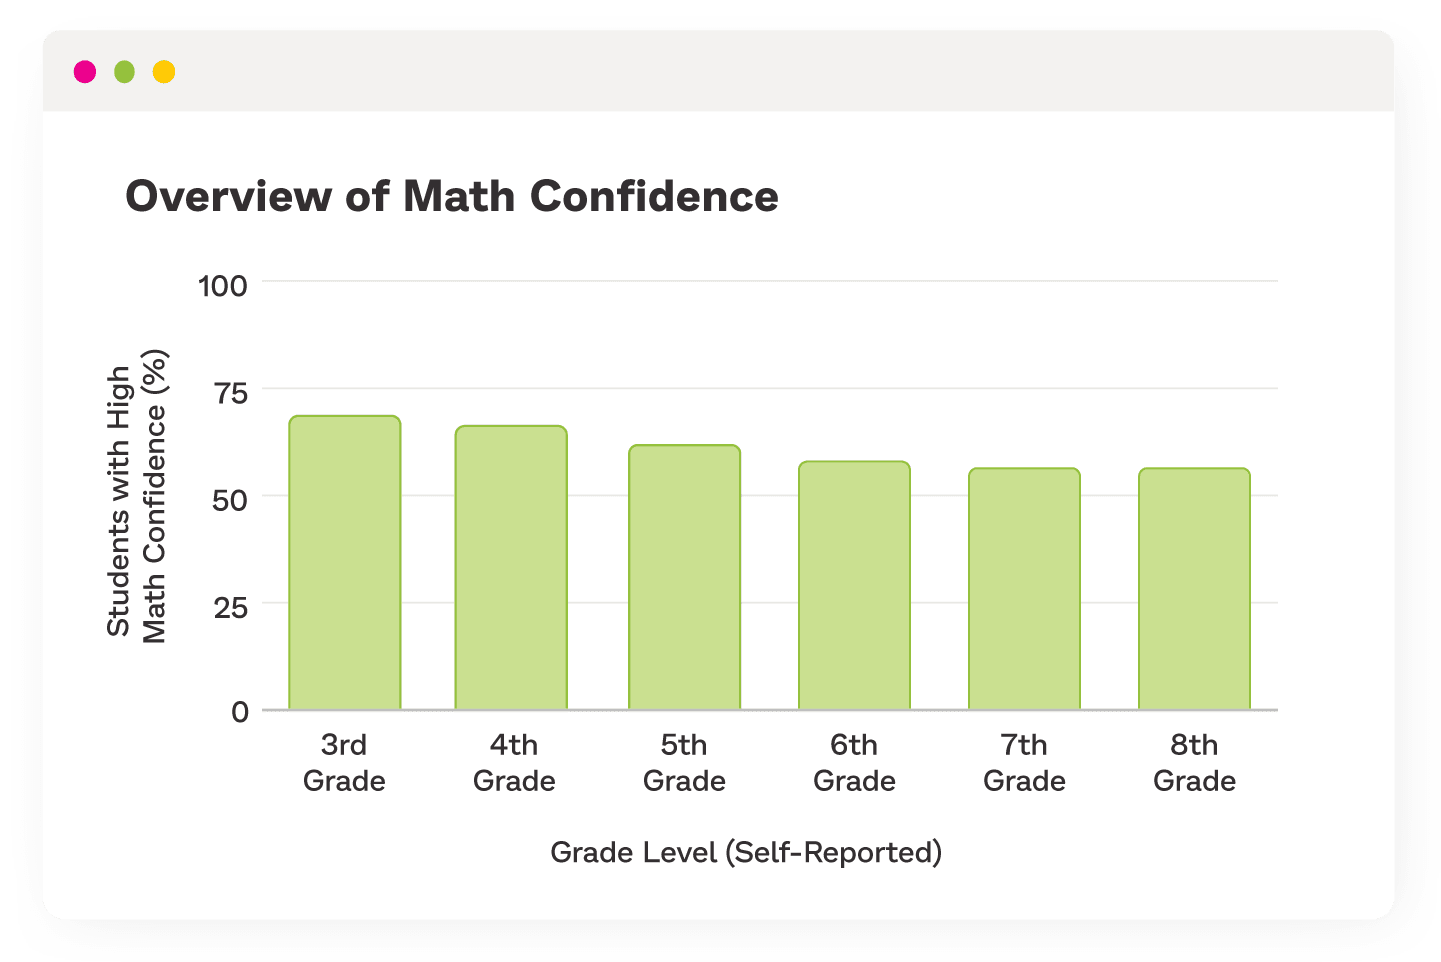 Overview of math confidence of Prodigy users by self-reported grade level, showing that younger Prodigy users are more likely to perceive themselves as confident.  